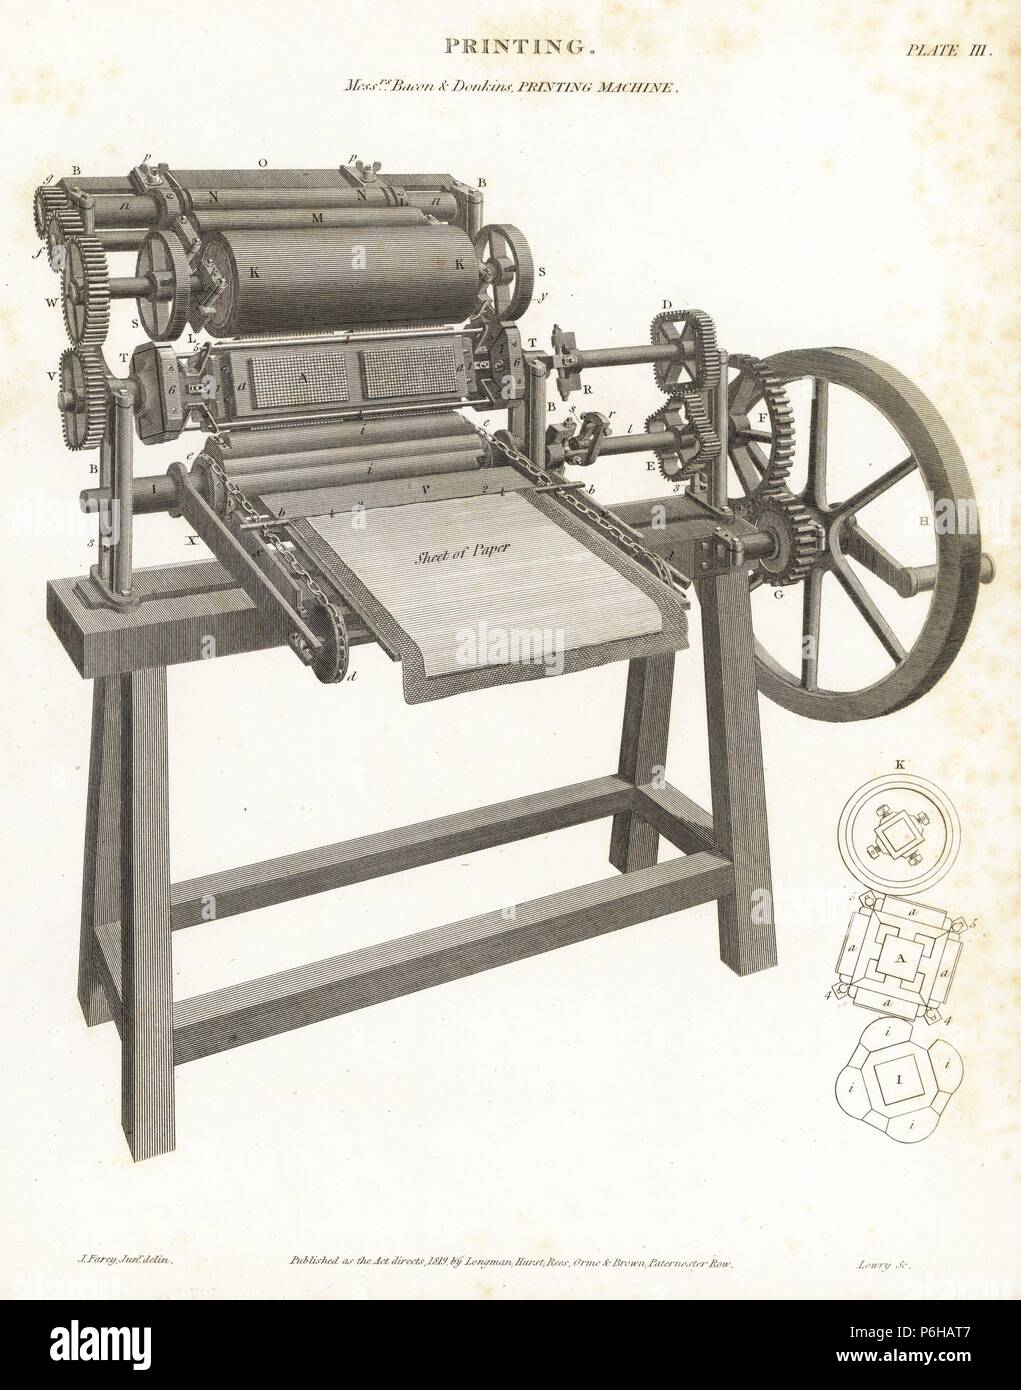 First rotary press printing machine patented by printer Richard Bacon and engineer Bryan Donkin, 1813. Copperplate engraving by Wilson Lowry after an illustration by J. Farey from Abraham Rees' 'Cyclopedia or Universal Dictionary,' London, 1816. Stock Photo